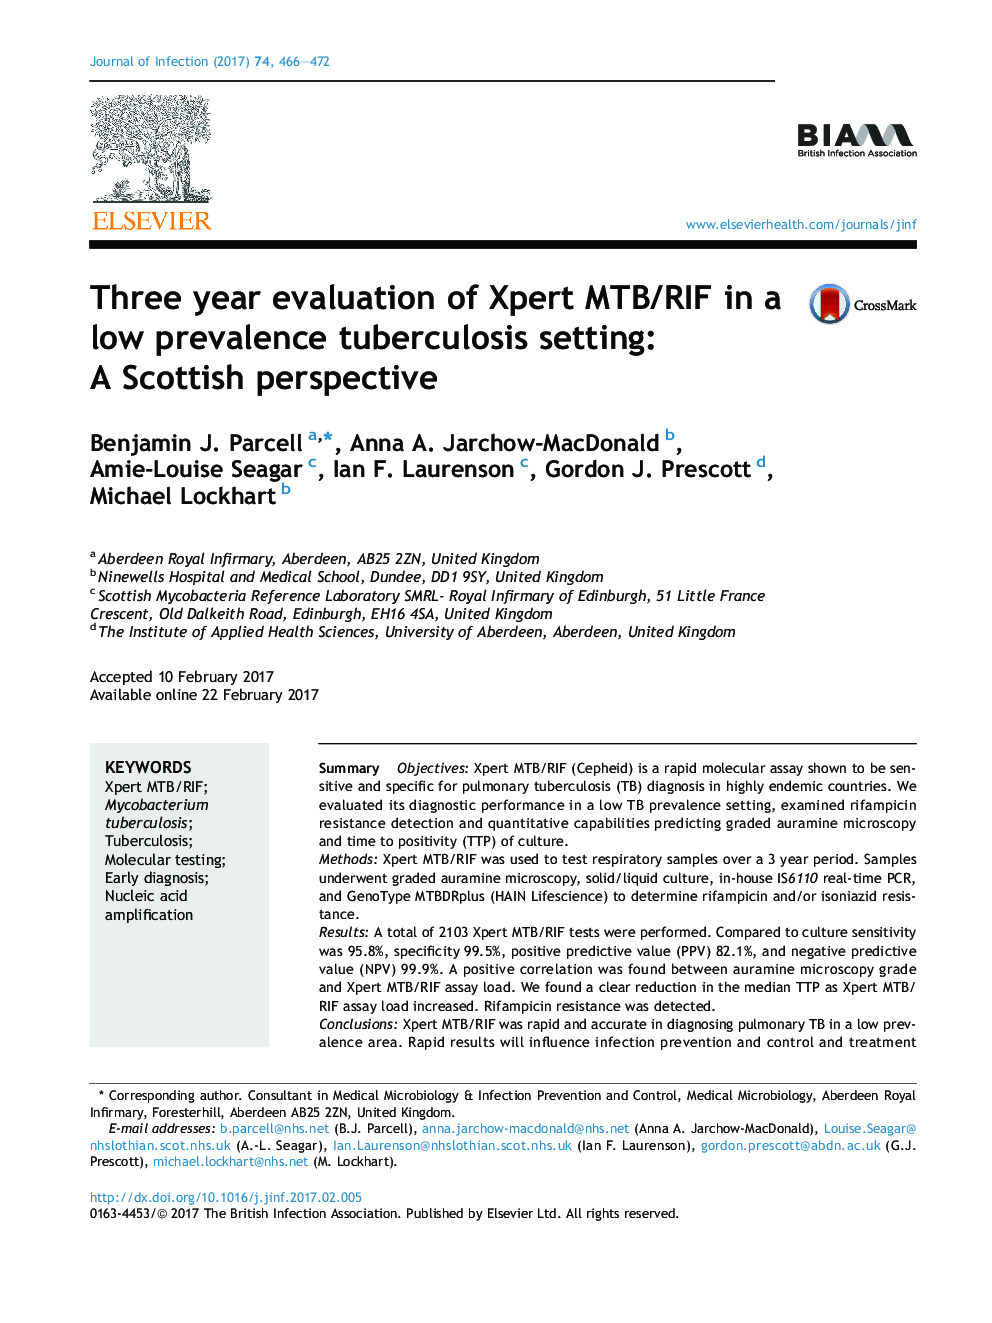 Three year evaluation of Xpert MTB/RIF in a low prevalence tuberculosis setting: AÂ Scottish perspective